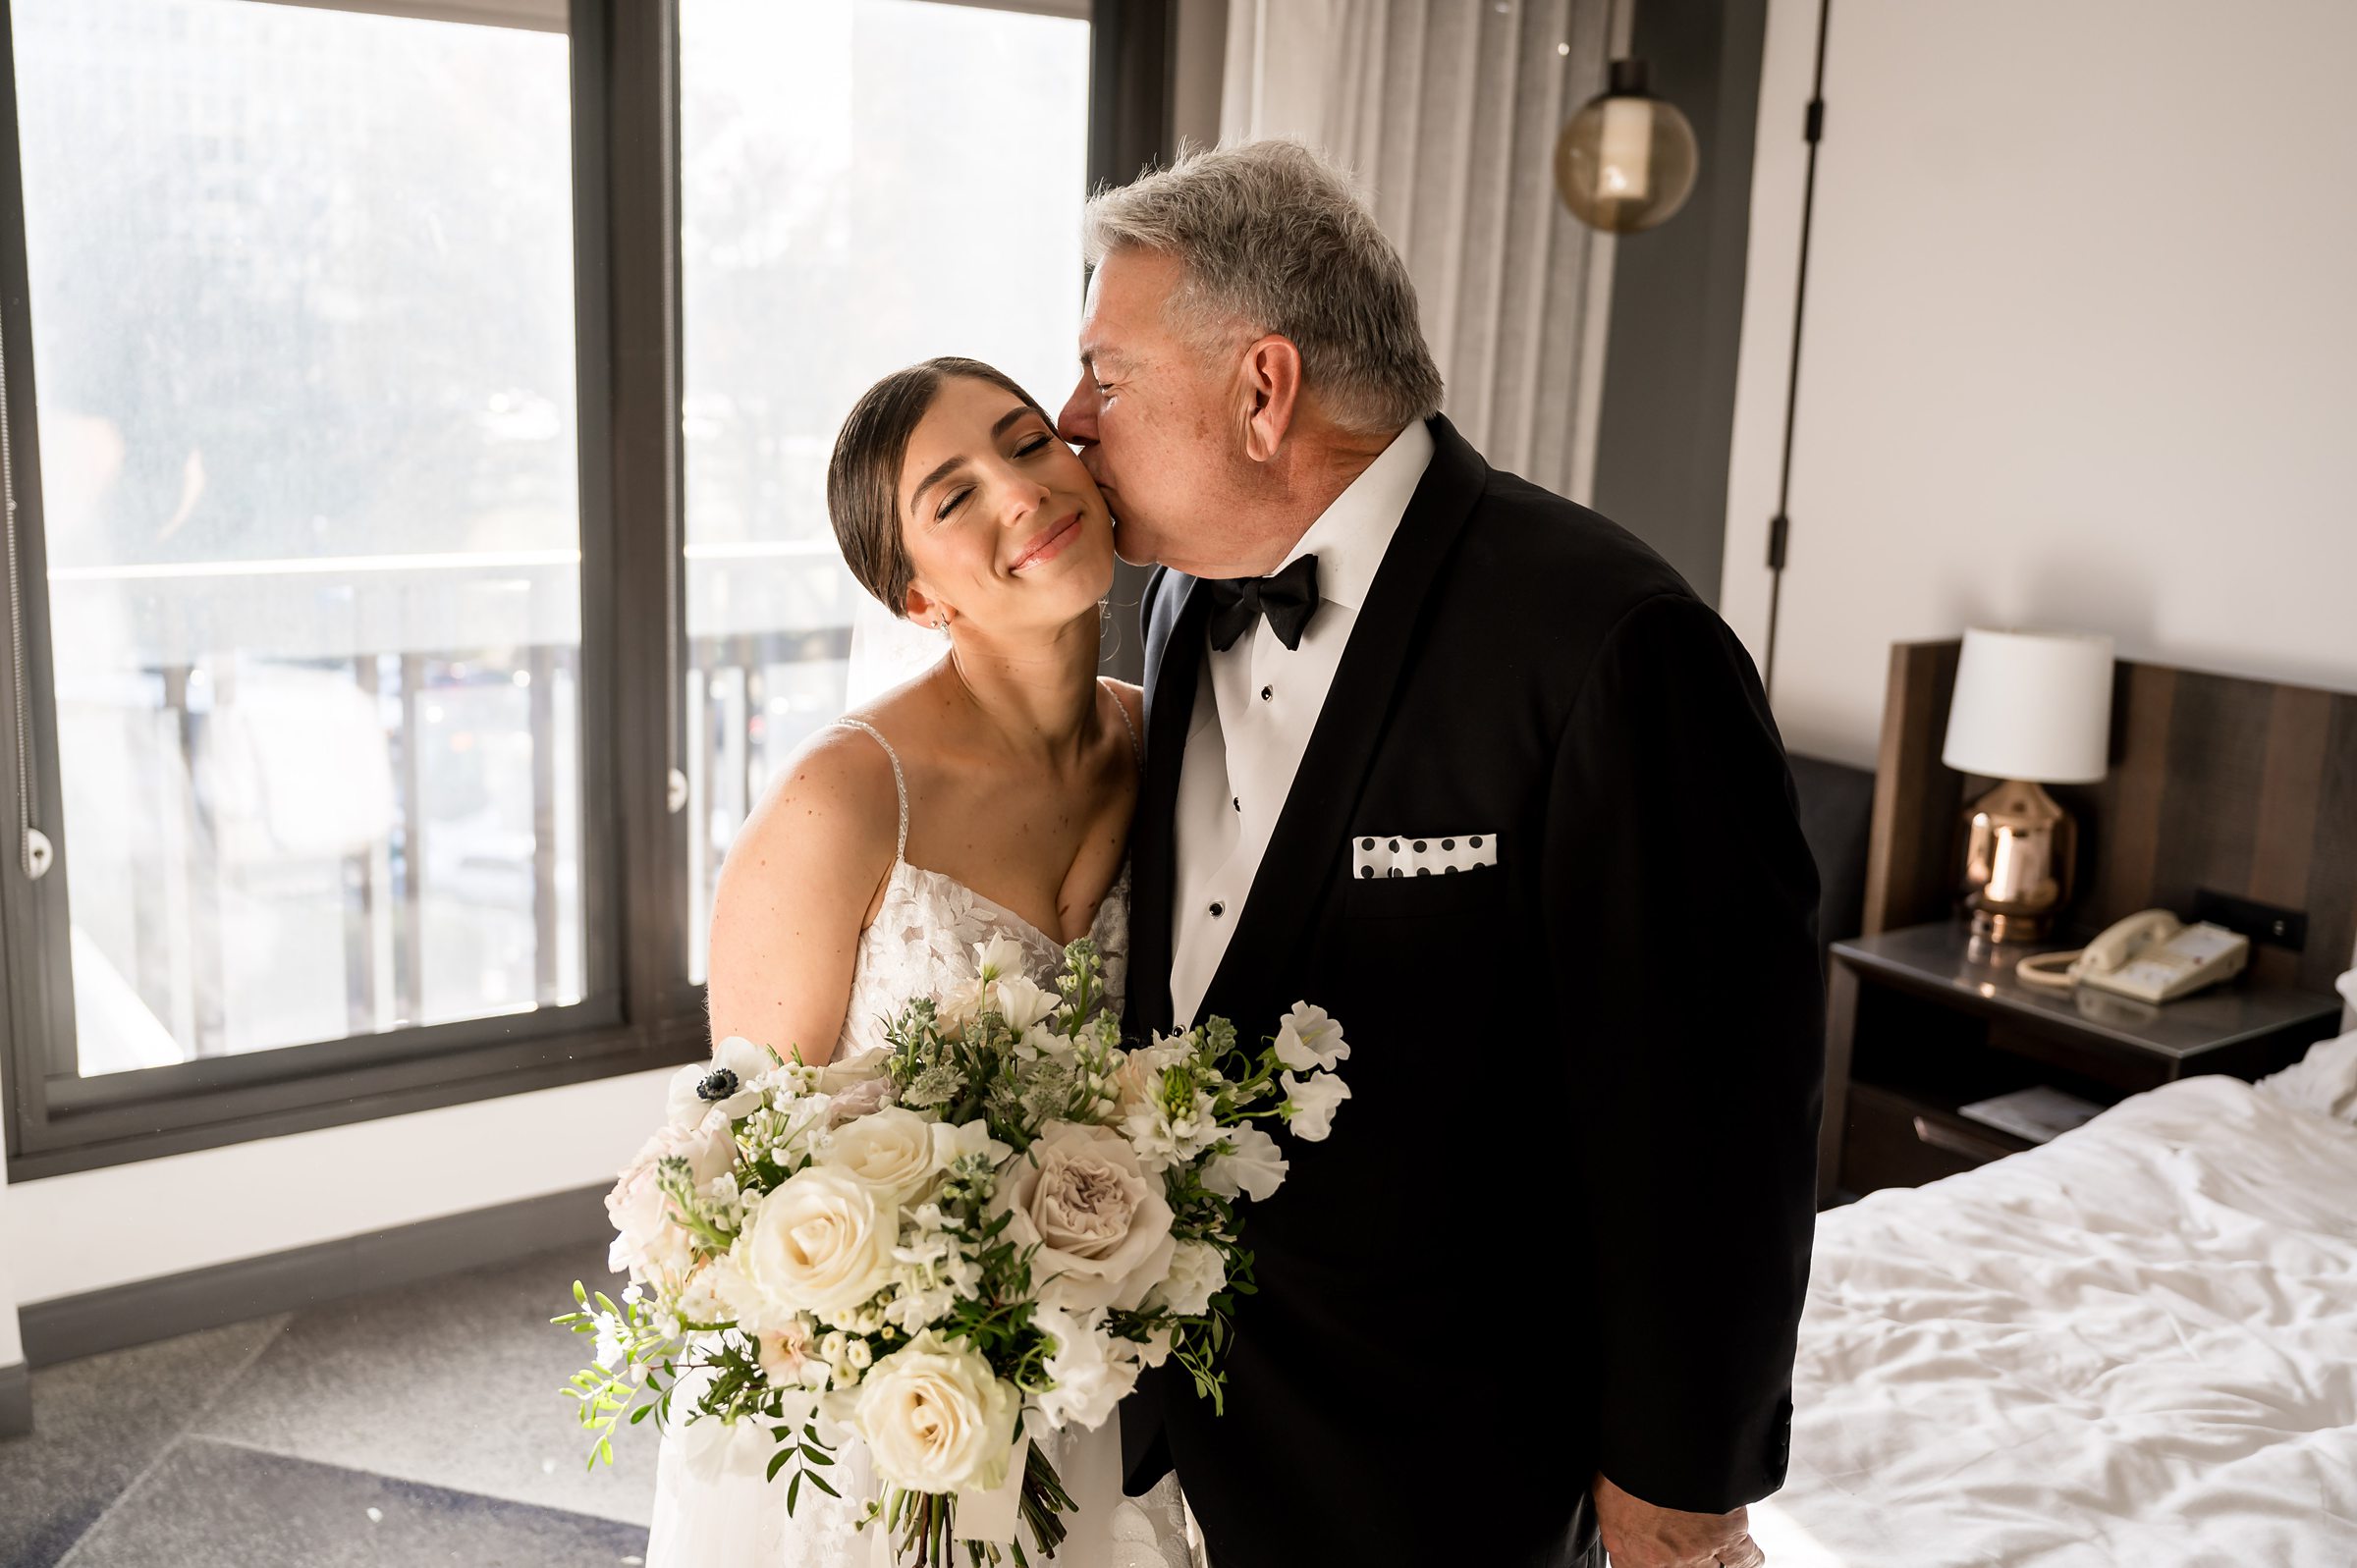 A bride and her father sharing a sweet moment in a hotel room during a Lilah Events wedding.